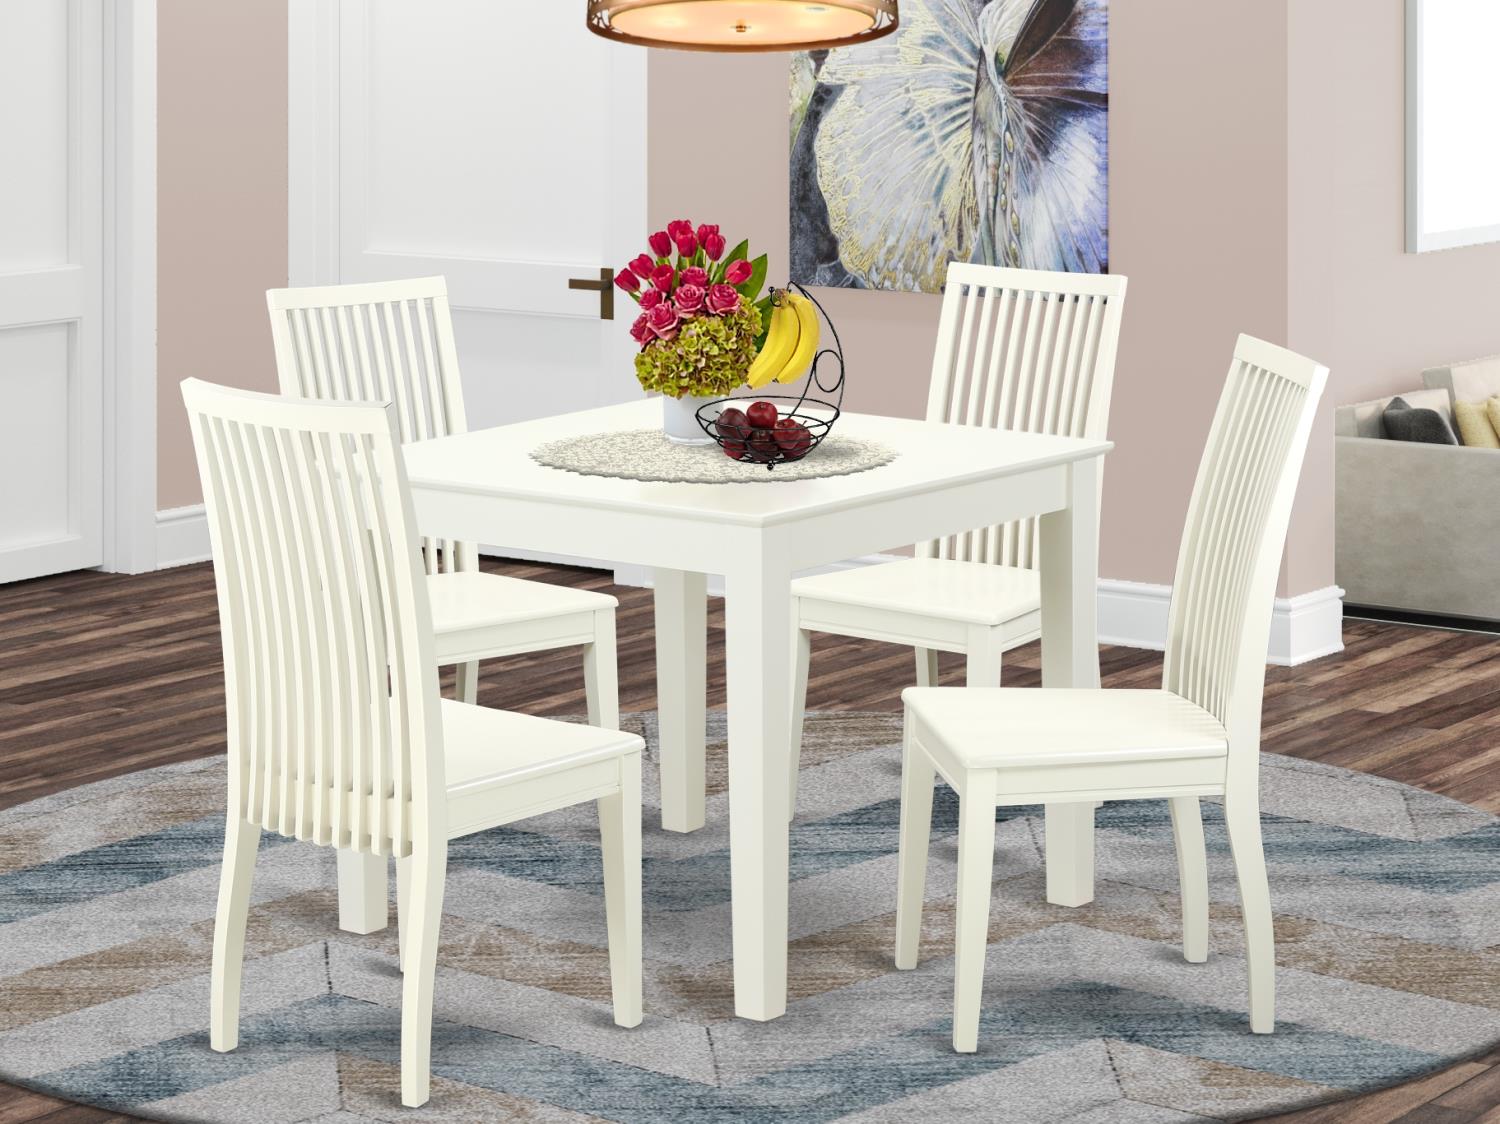 East West Furniture Oxford Wood 5-Piece Dining Set With White OXIP5-LWH-W